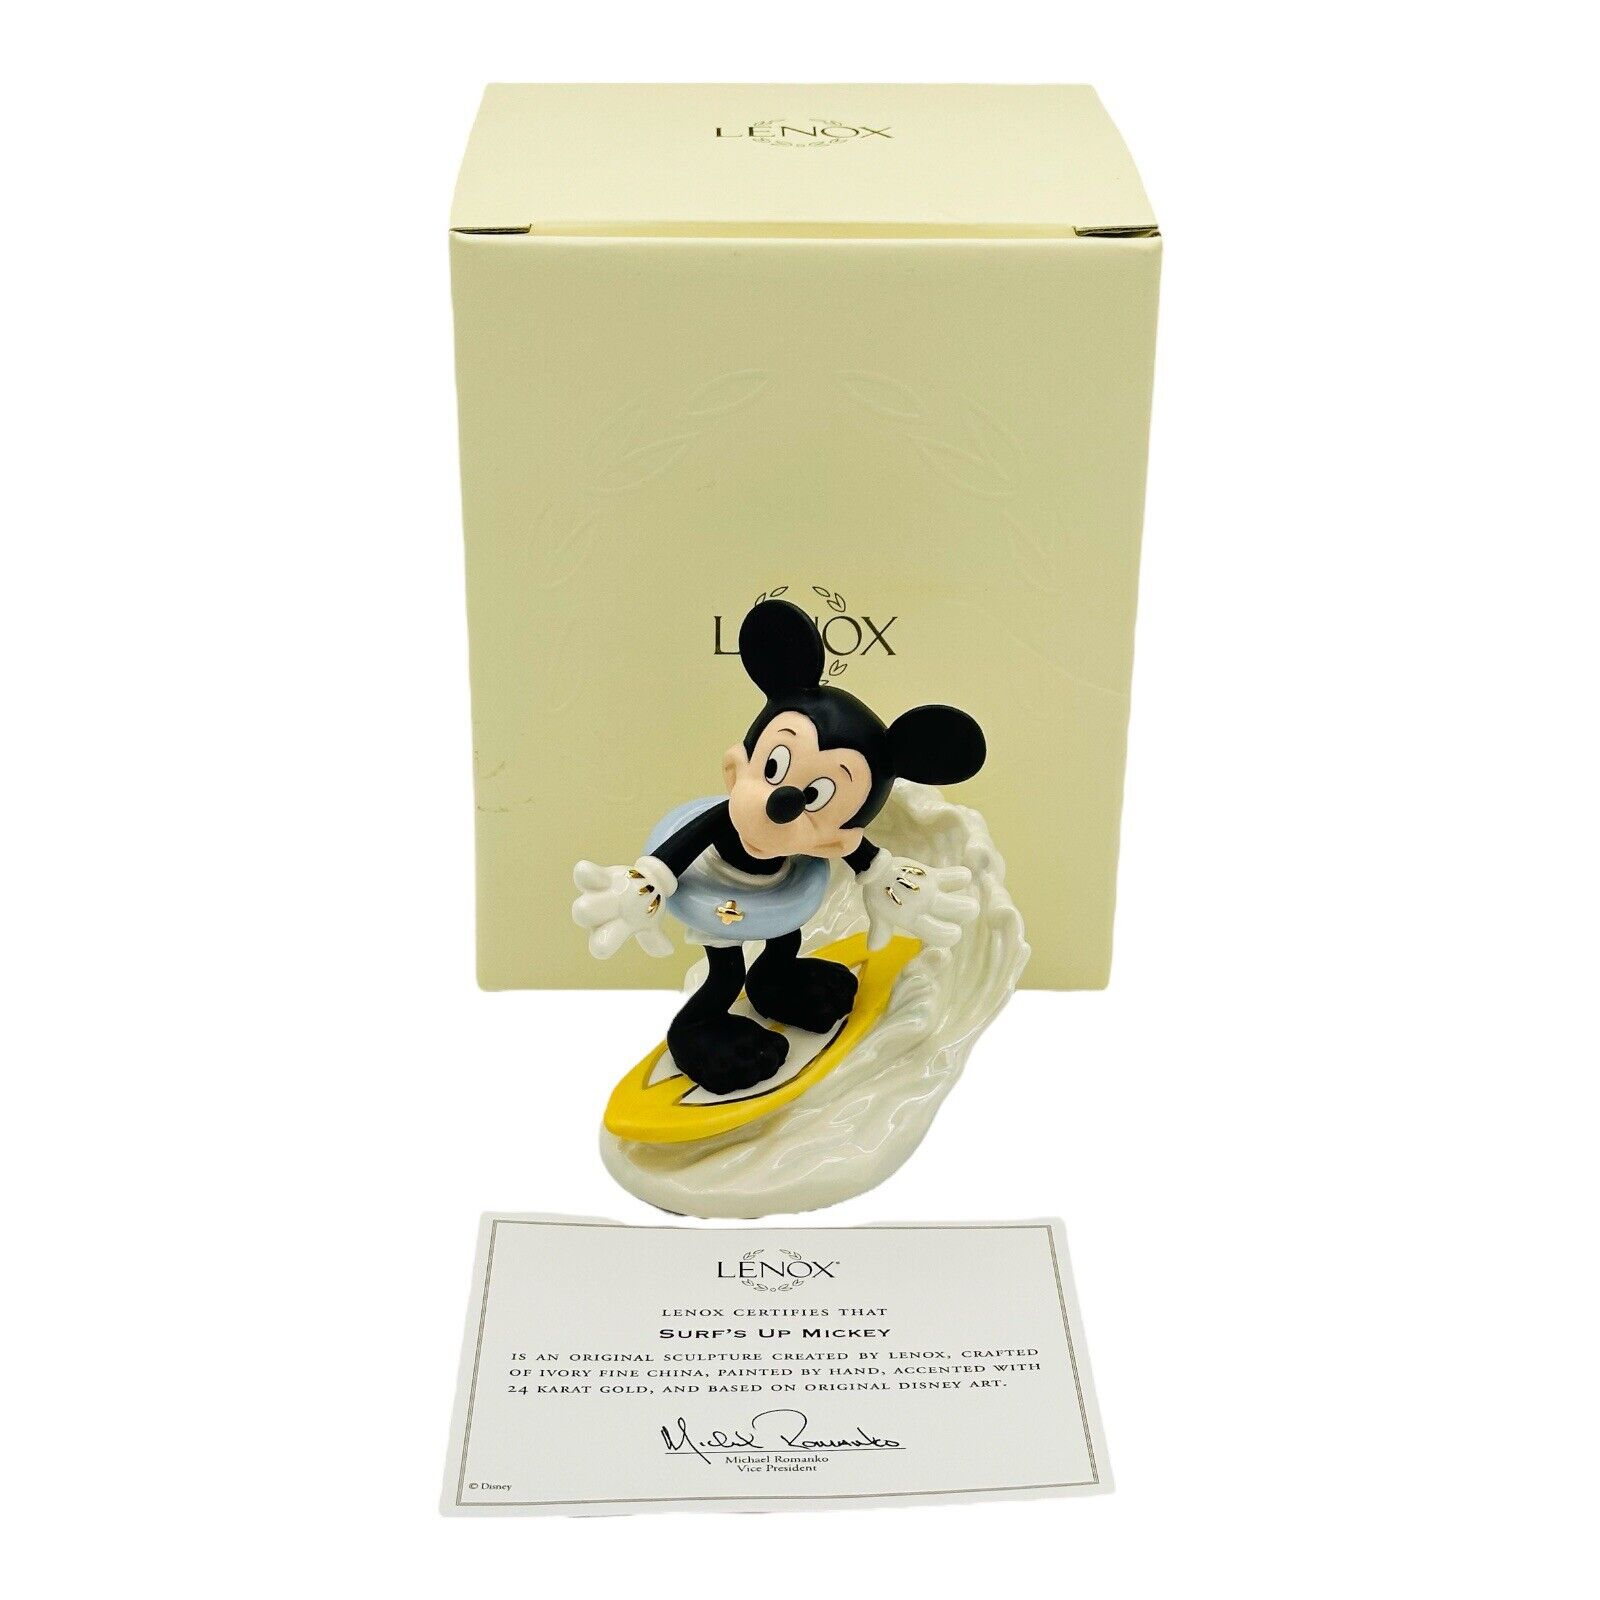 Lenox Disney Surf’s Up Mickey Mouse Figurine Mickey For All Seasons Collection